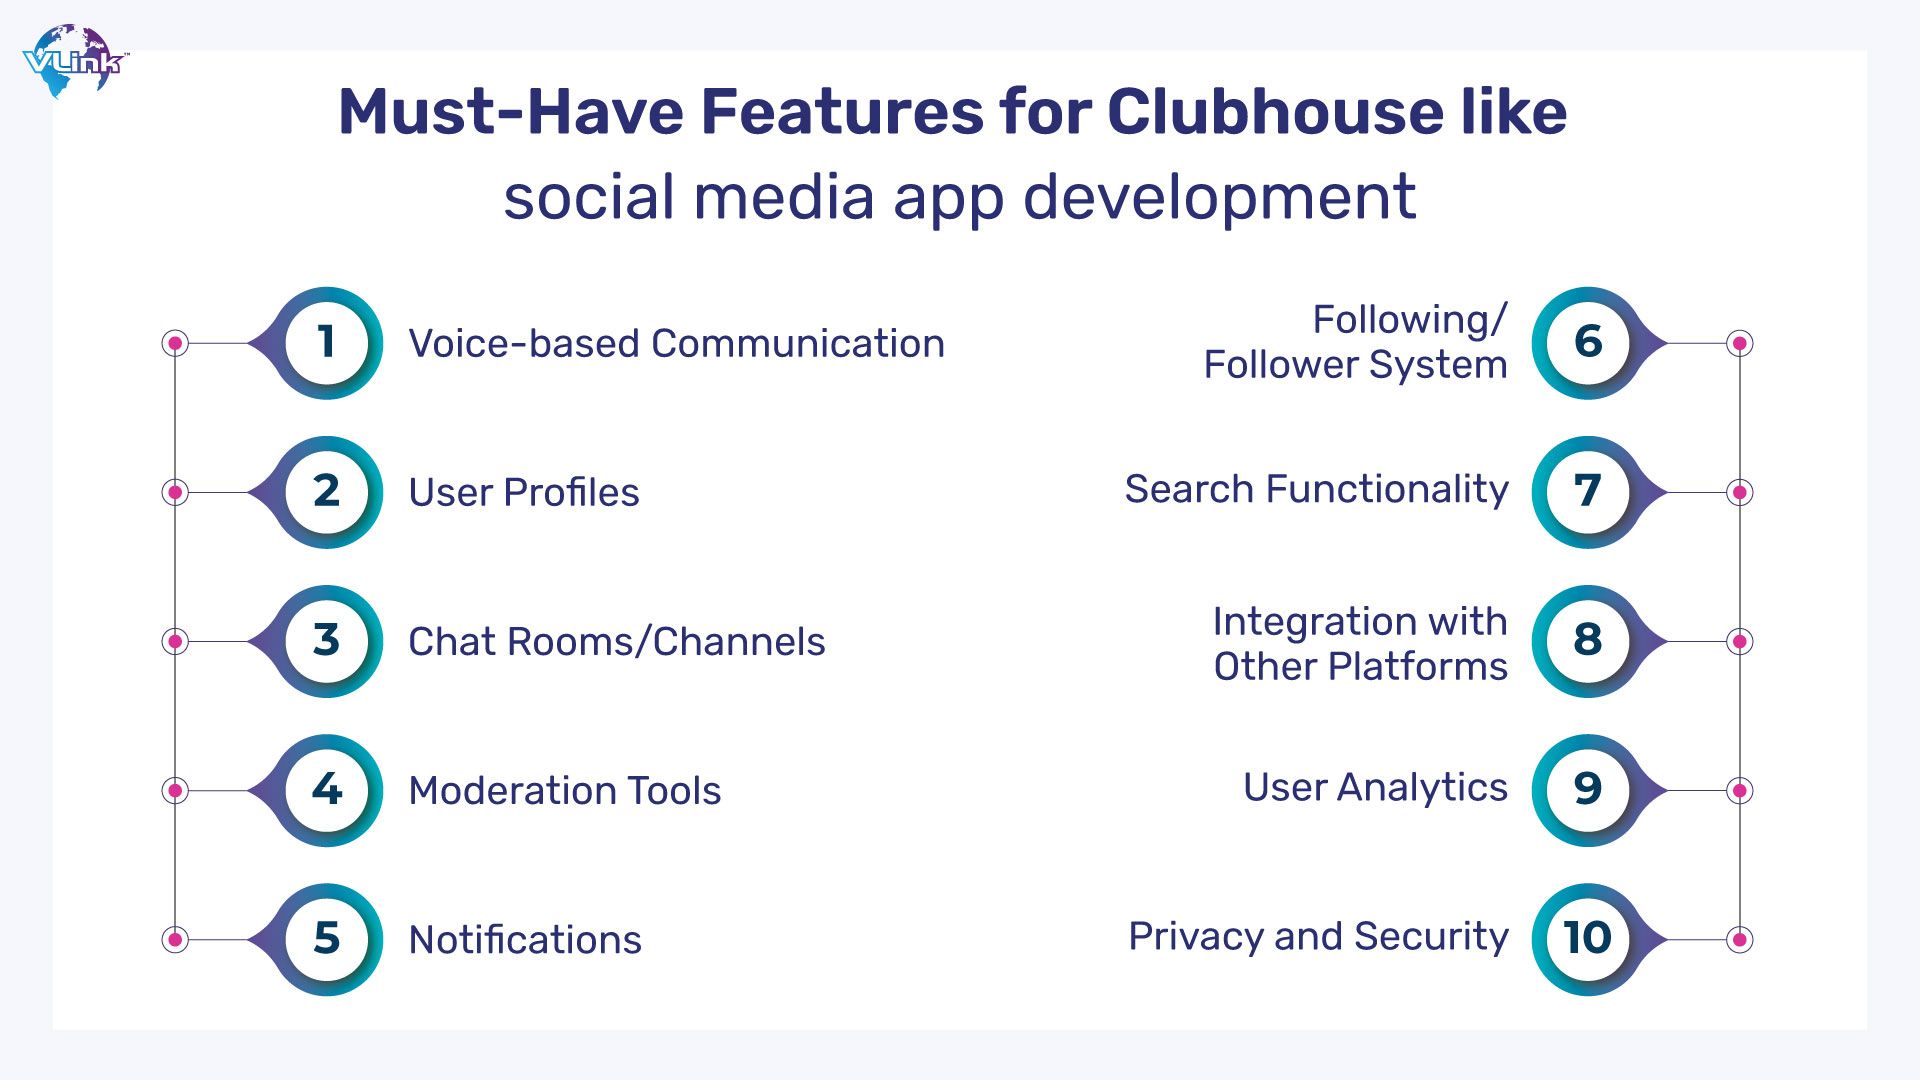 Must-Have Features for Clubhouse Like Social Media App Development